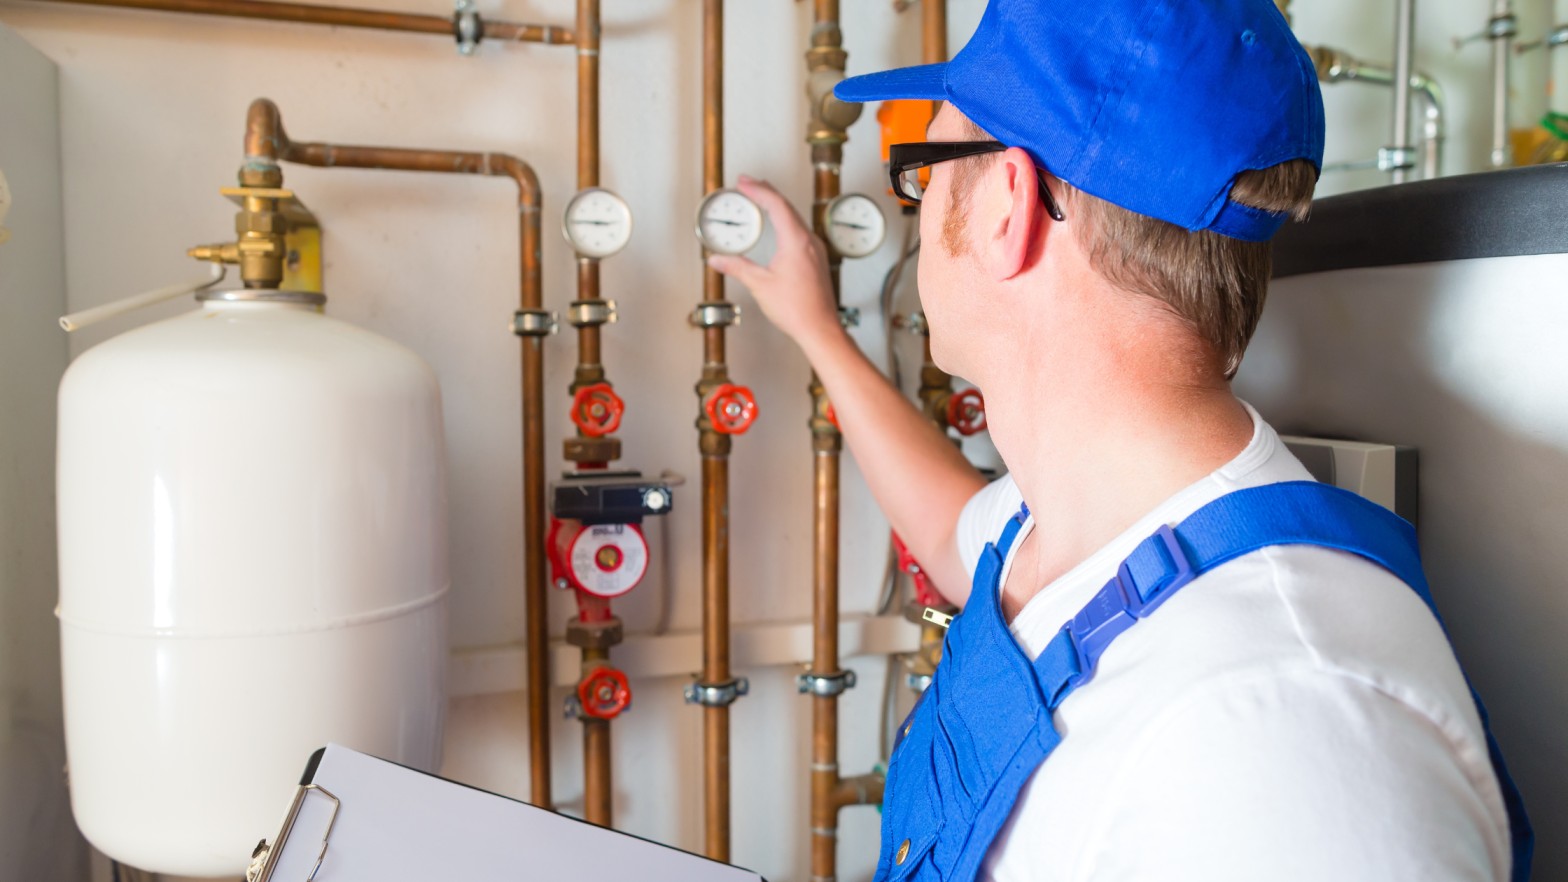  What are the main differences between plumbers and heating engineers?